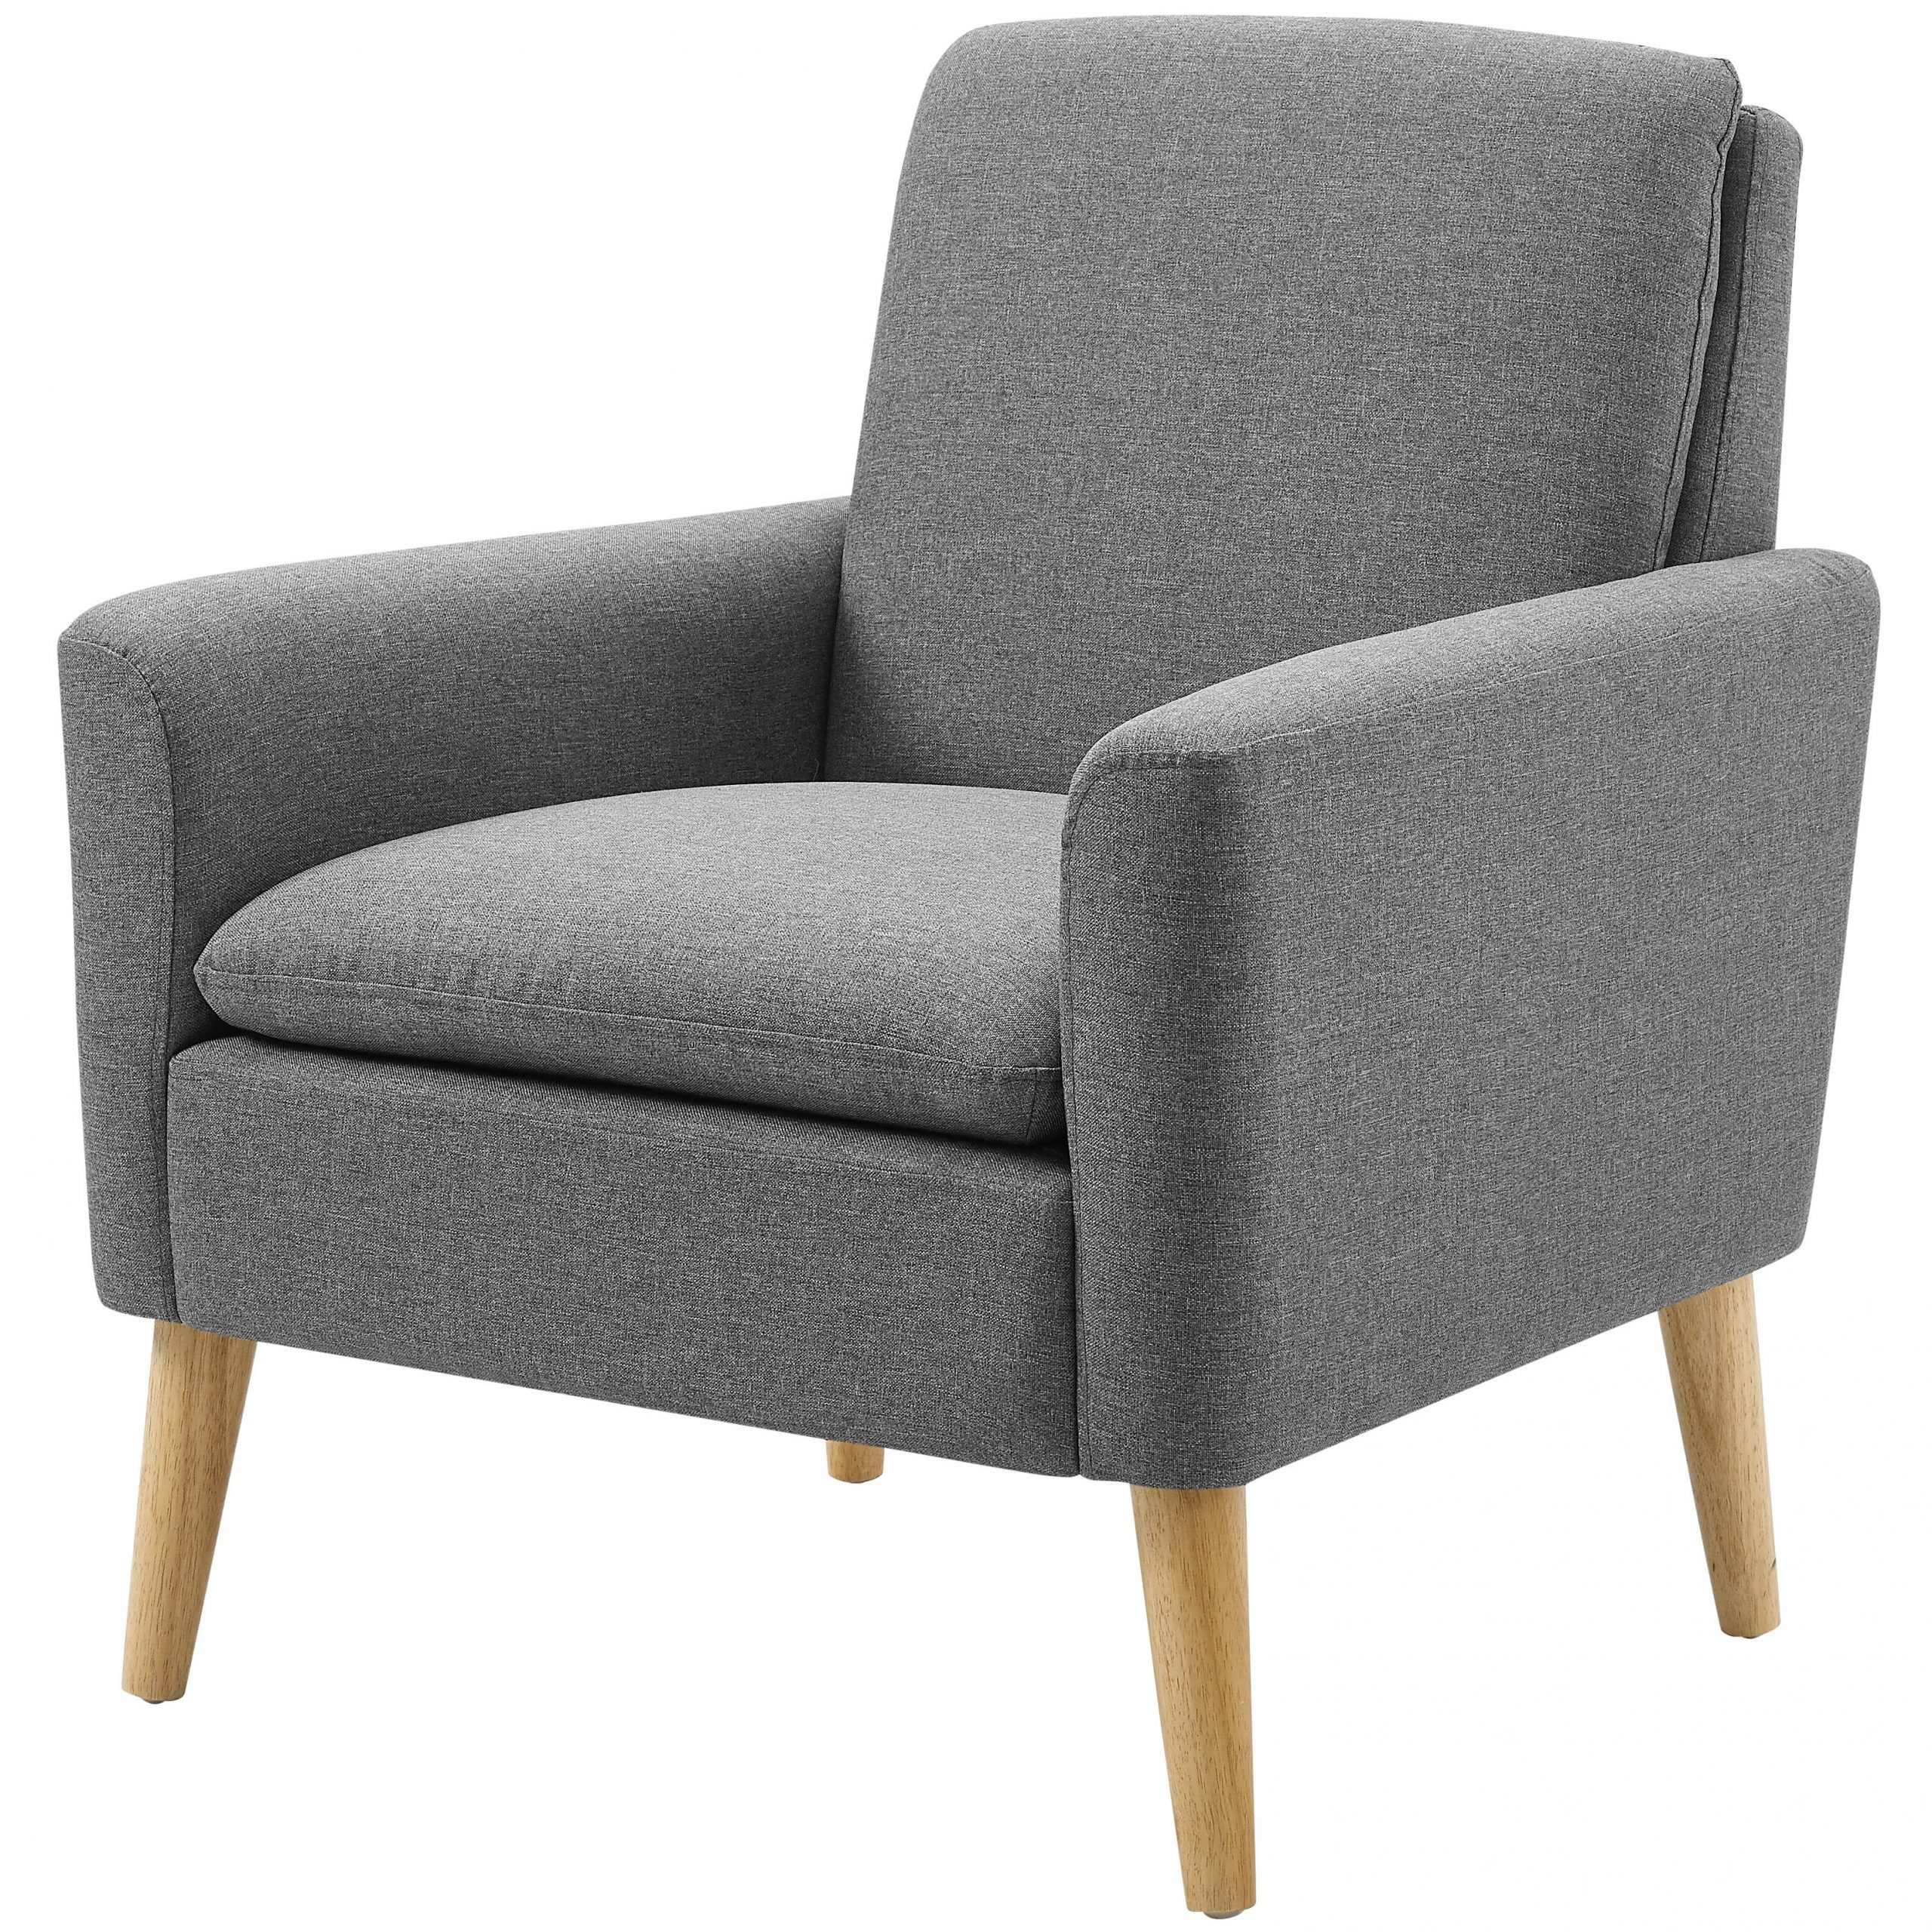 Hiltz Armchairs Pertaining To Preferred Abordale Arm Chair (View 10 of 20)